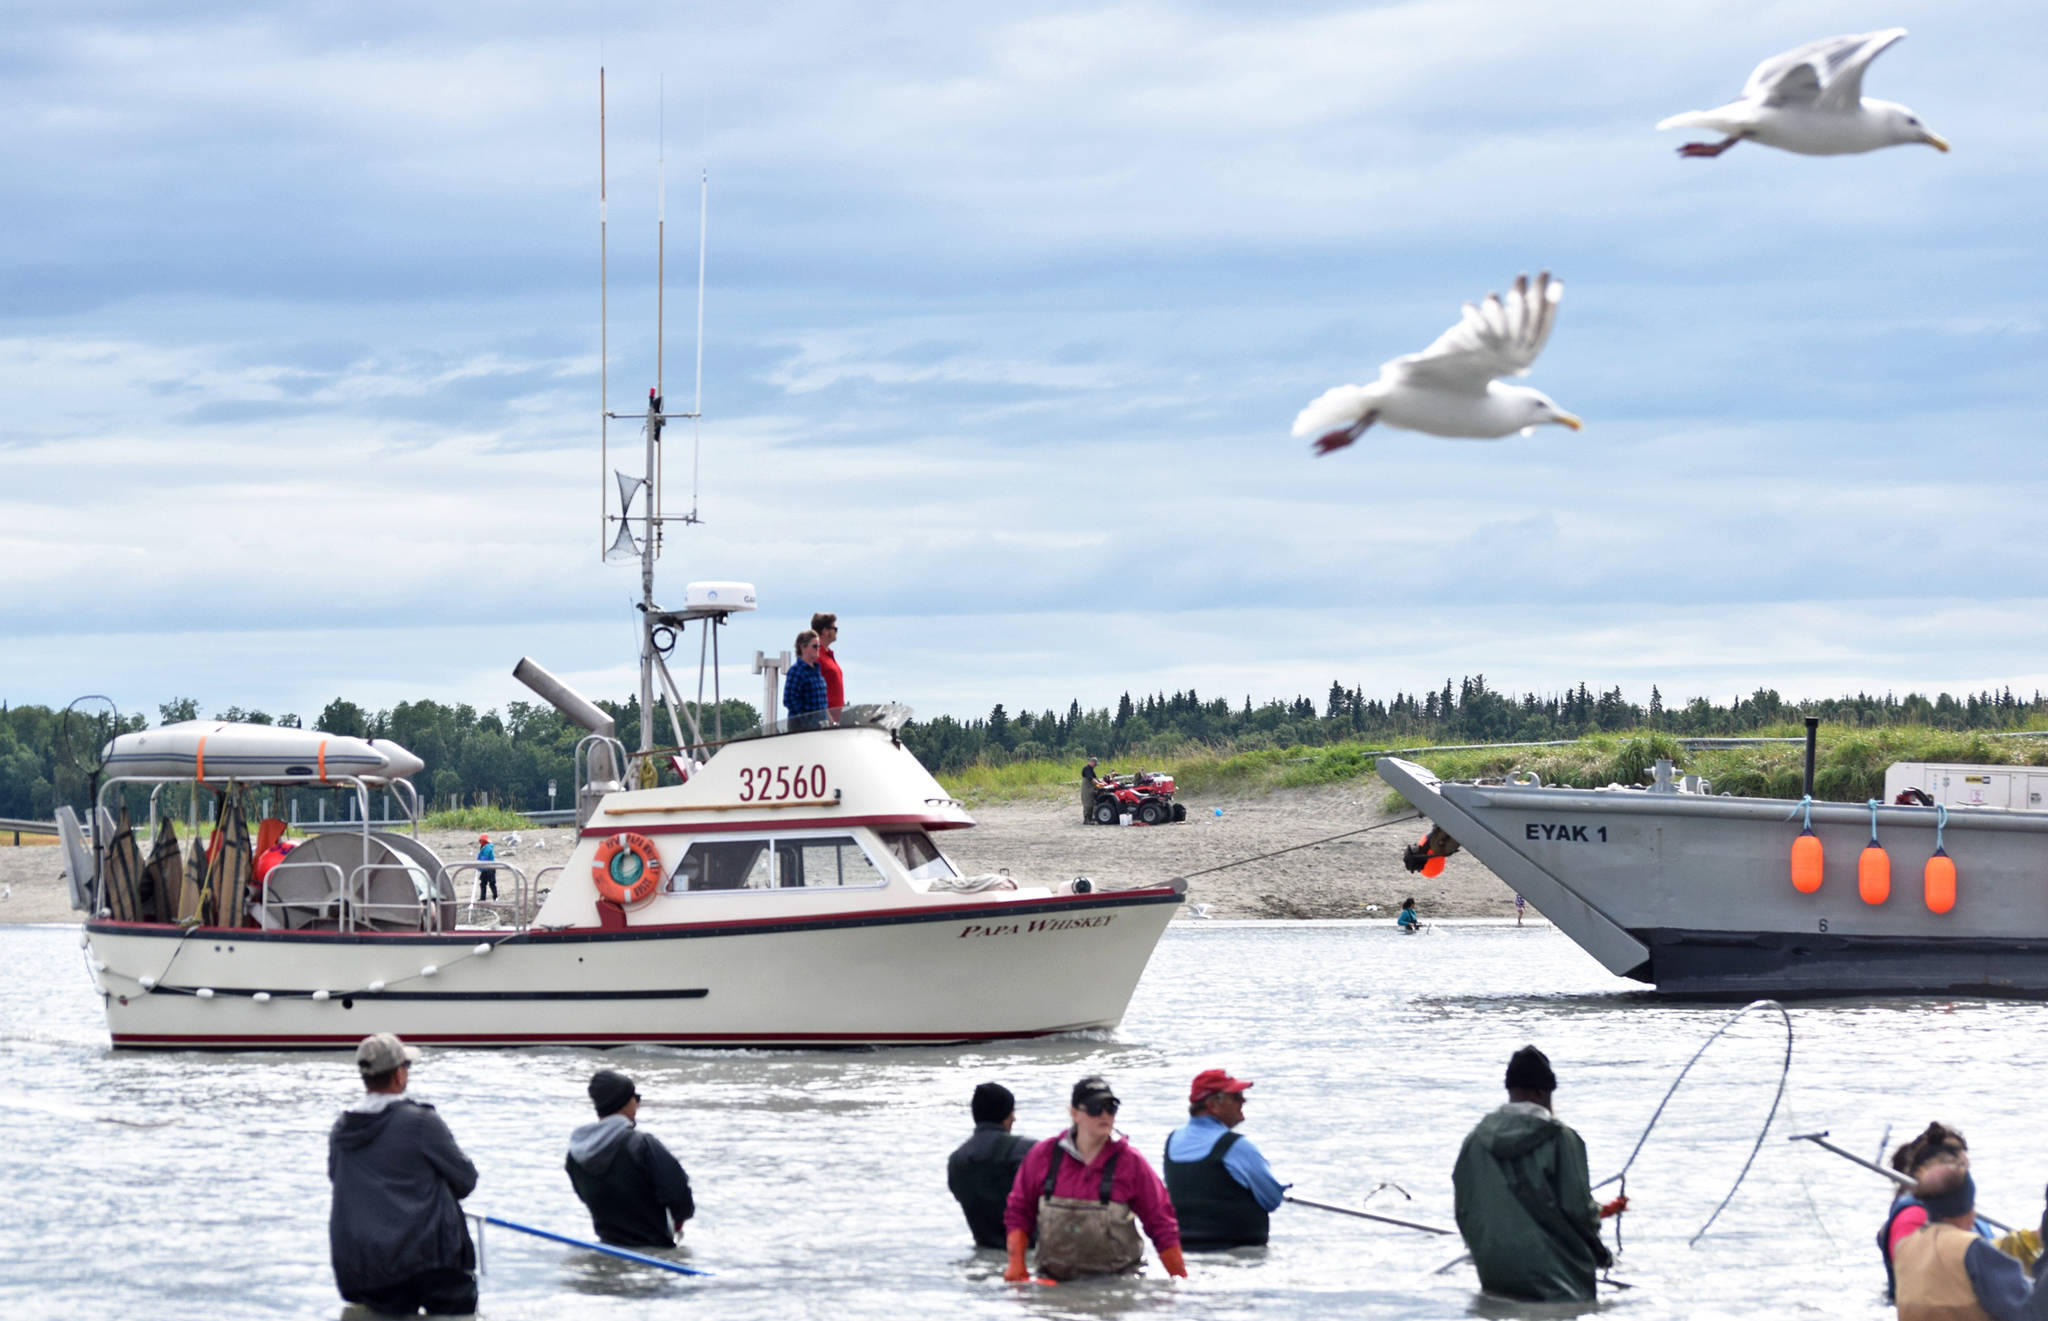 A commercial fishing vessel motors slowly past lines of personal-use dipnet fishermen in the mouth of the Kasilof River on Tuesday, July 31, 2018 in Kasilof, Alaska. (Photo by Elizabeth Earl/Peninsula Clarion)